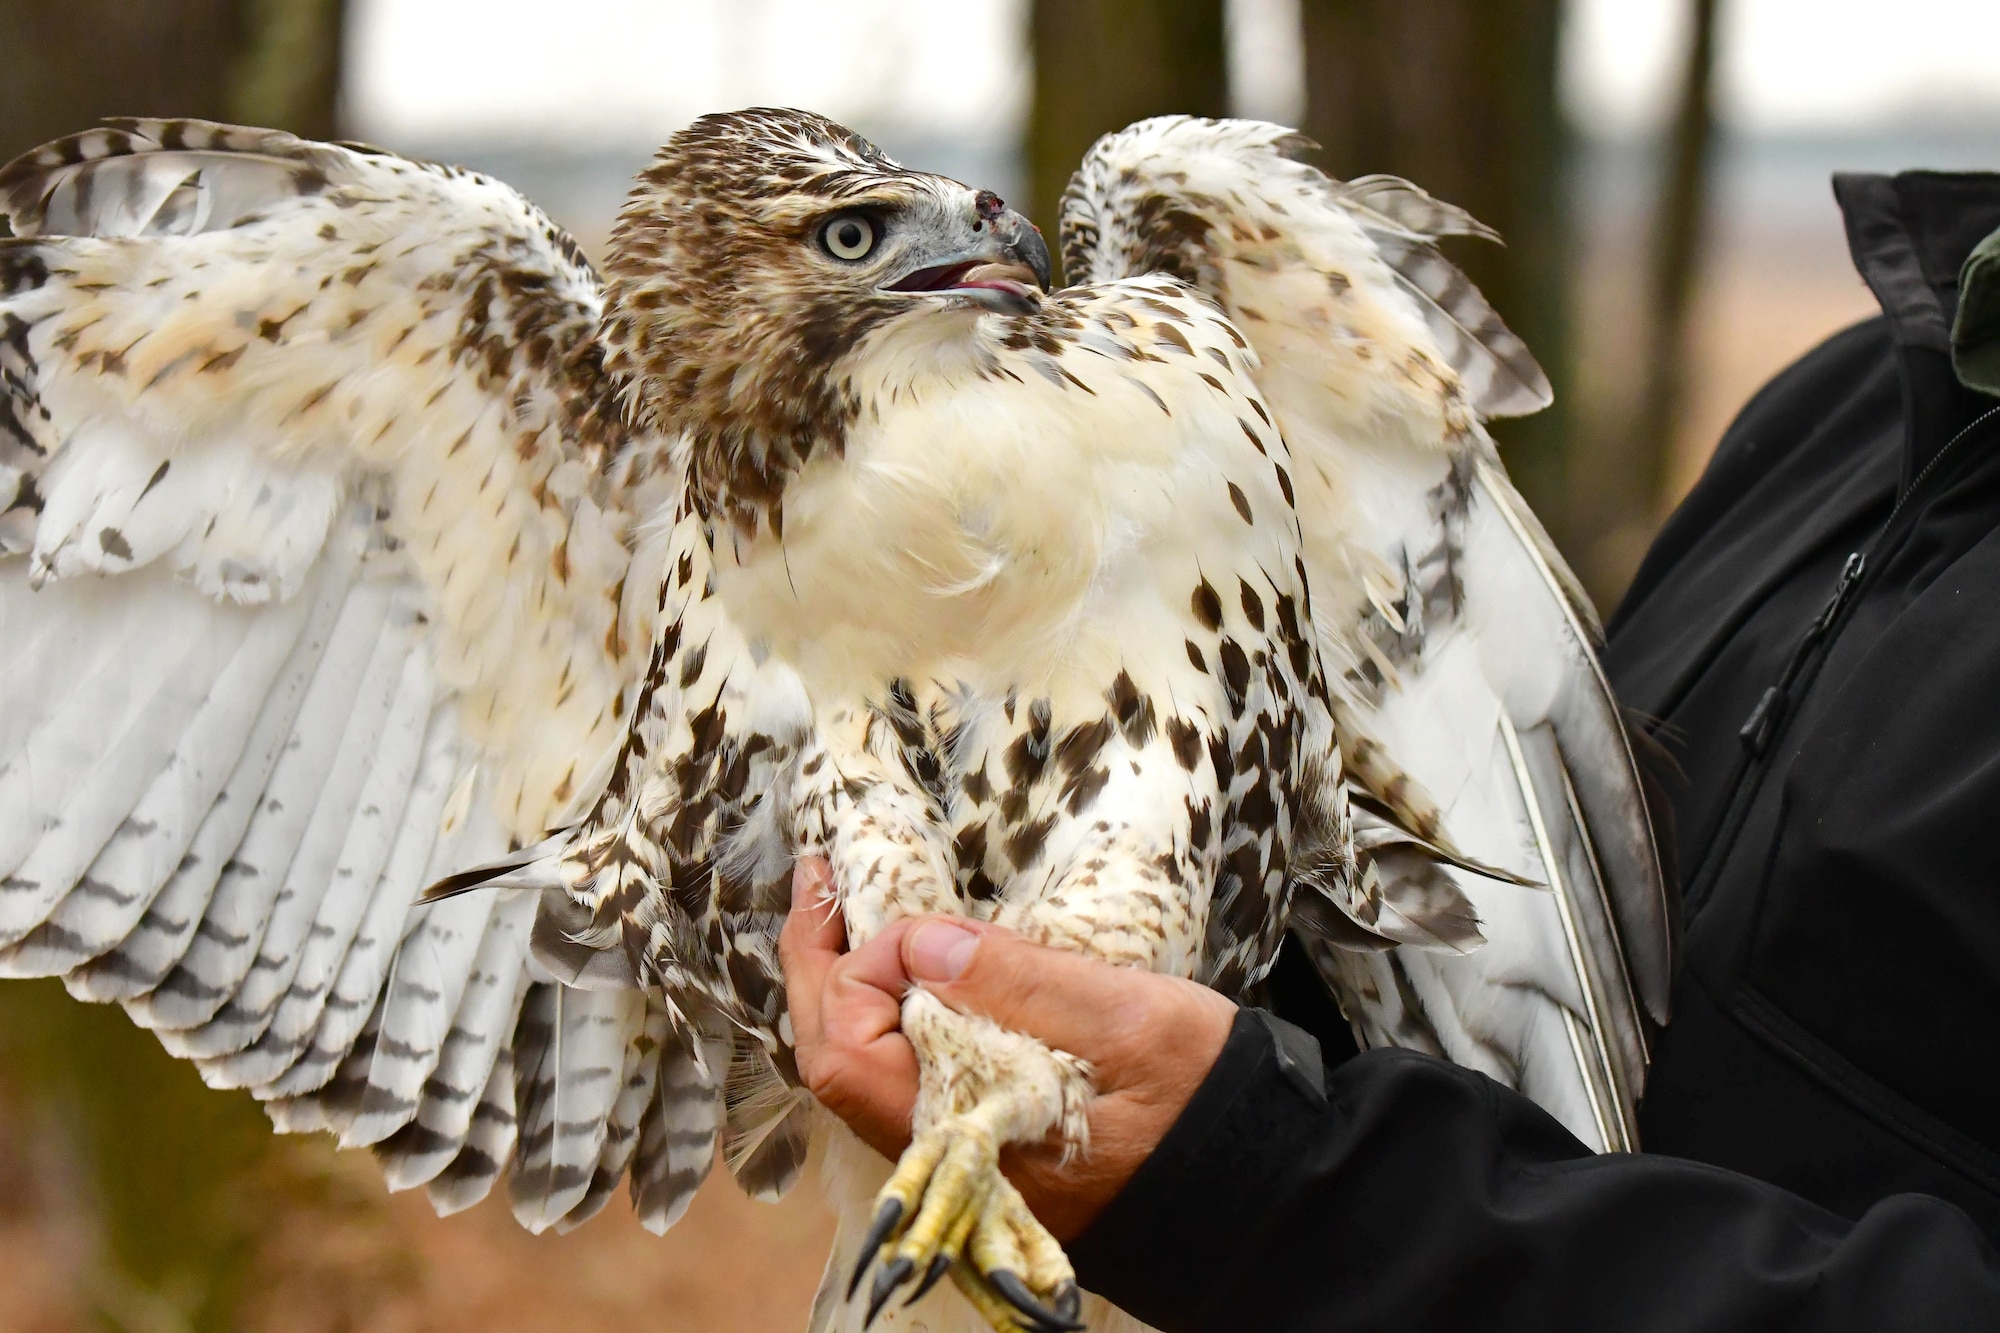 A Swainson's hawk is prepared for release November 15, 2018, in a forested area near Bismarck, North Dakota. The hawk was rescued a month prior by members of the 319th Logistics Readiness Squadron on Grand Forks Air Force Base, N.D. (Courtesy photo by Mike LaLonde/Dakota Zoo)